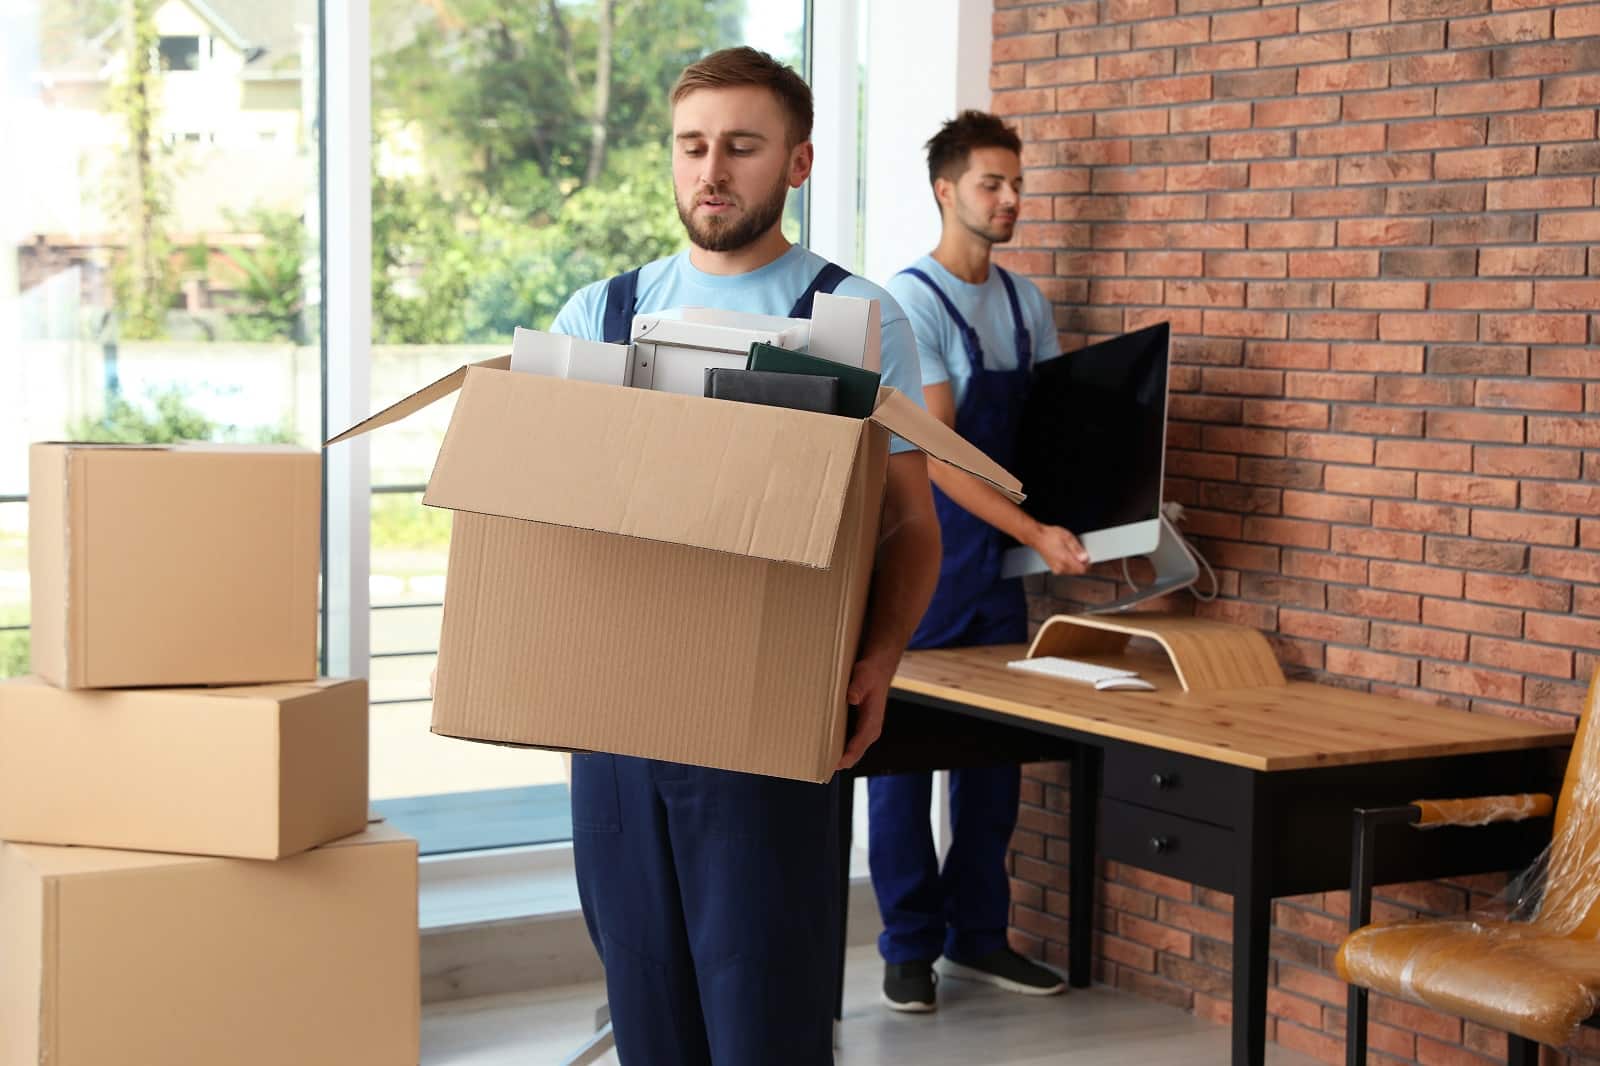 7 Steps To Take Before Renting Out Your Property. Moving service workers arranging the new place